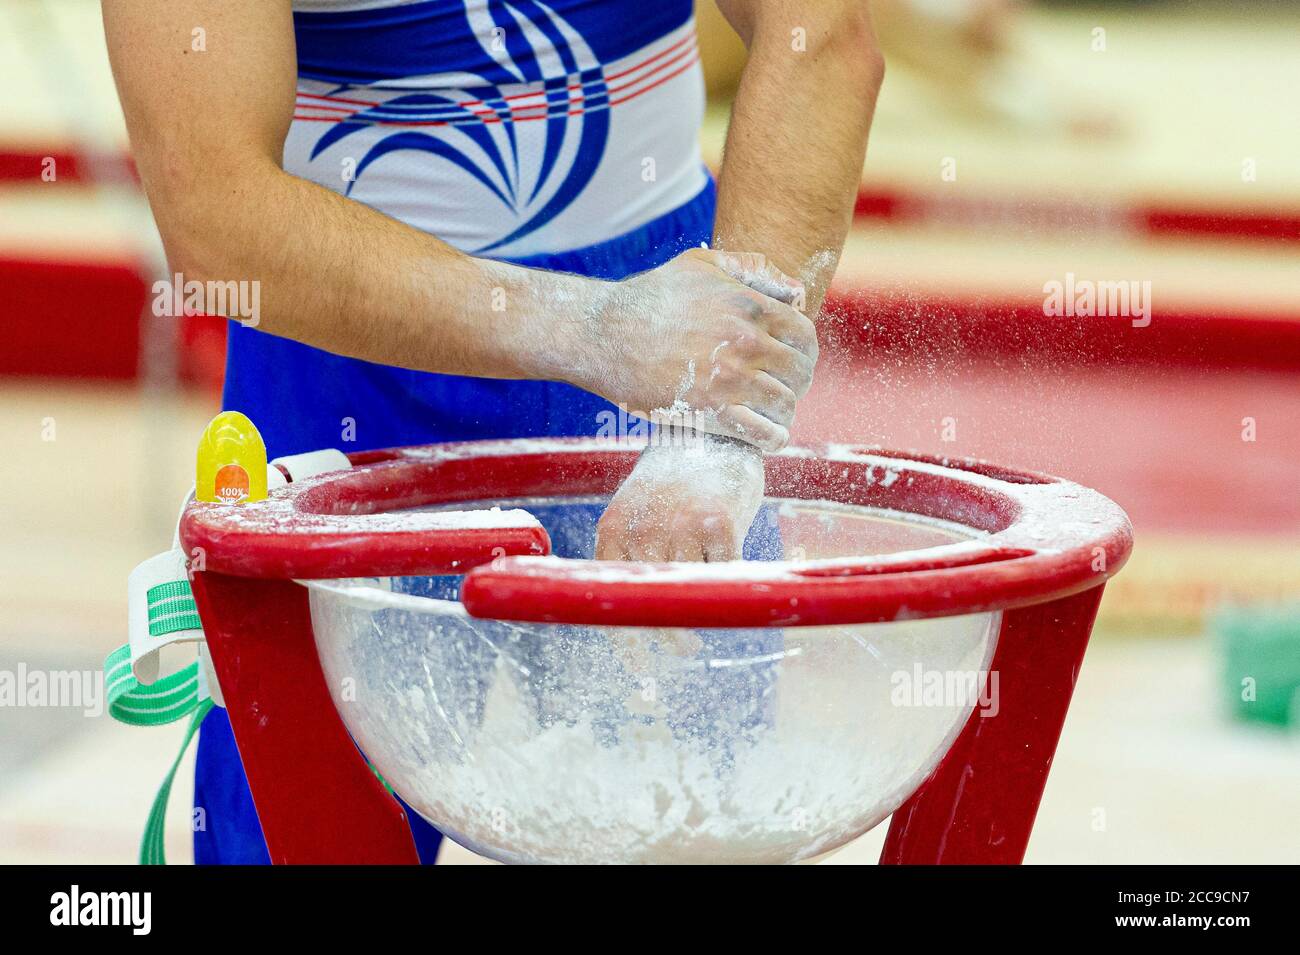 Gymnast of the French national team using chalk to dry his hands during a Men's Artistic Gymnastics event Stock Photo